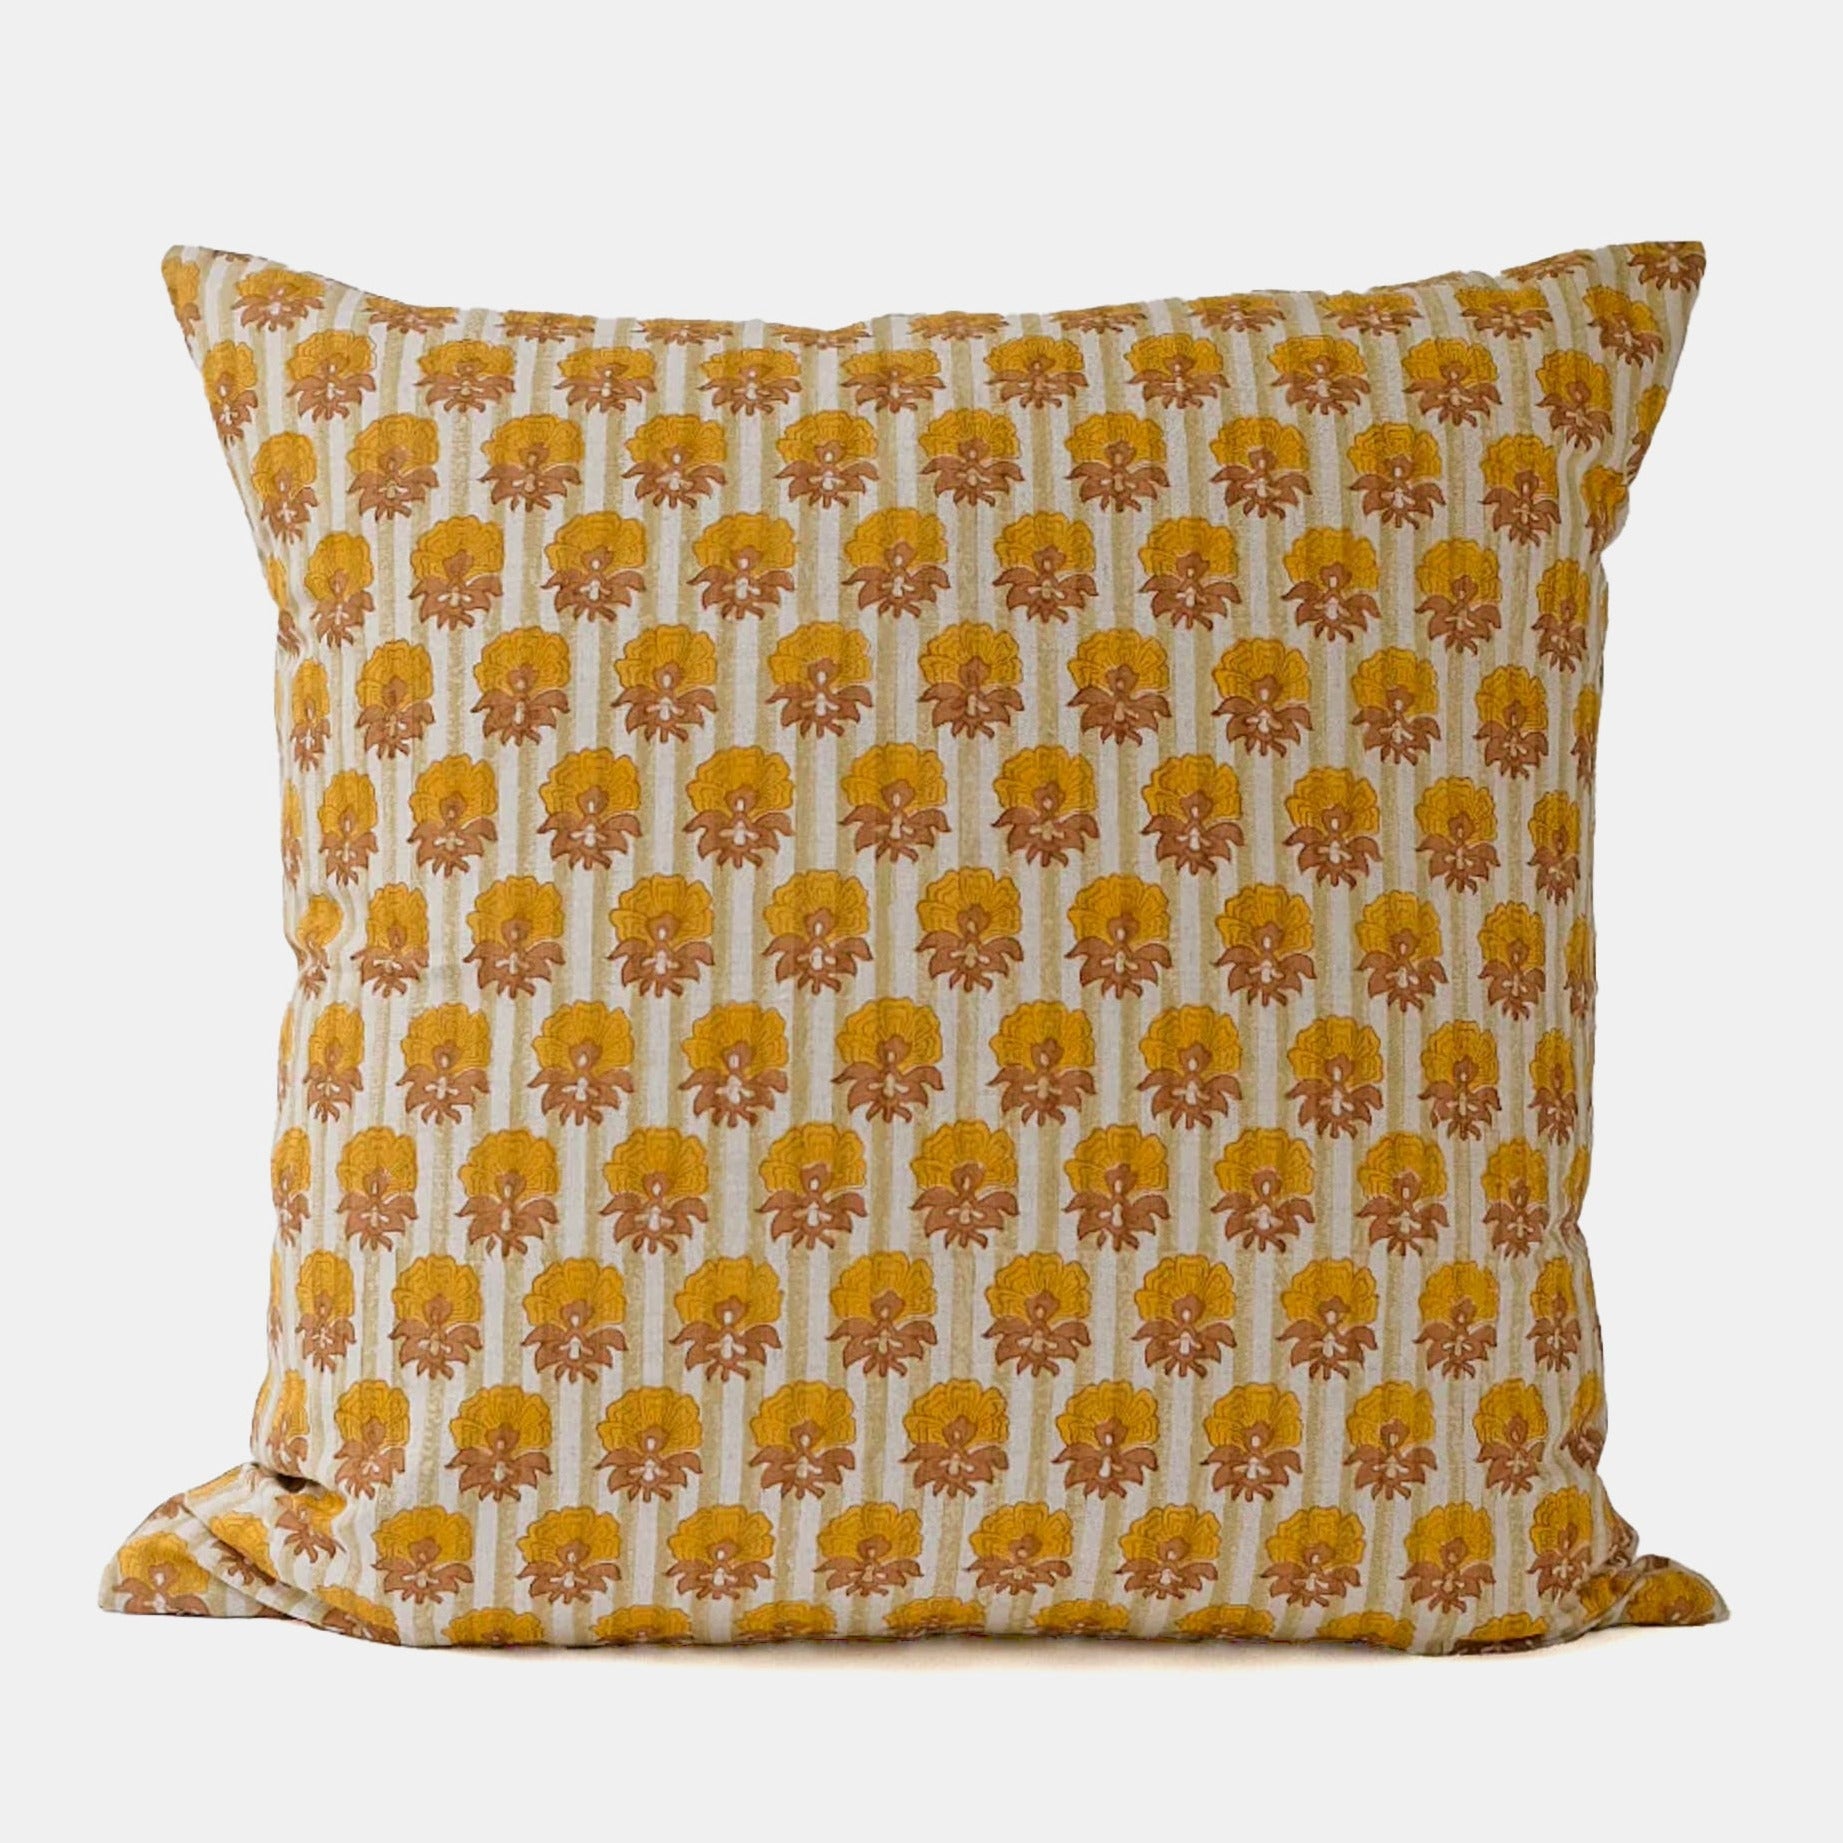 Veda Pillow, square